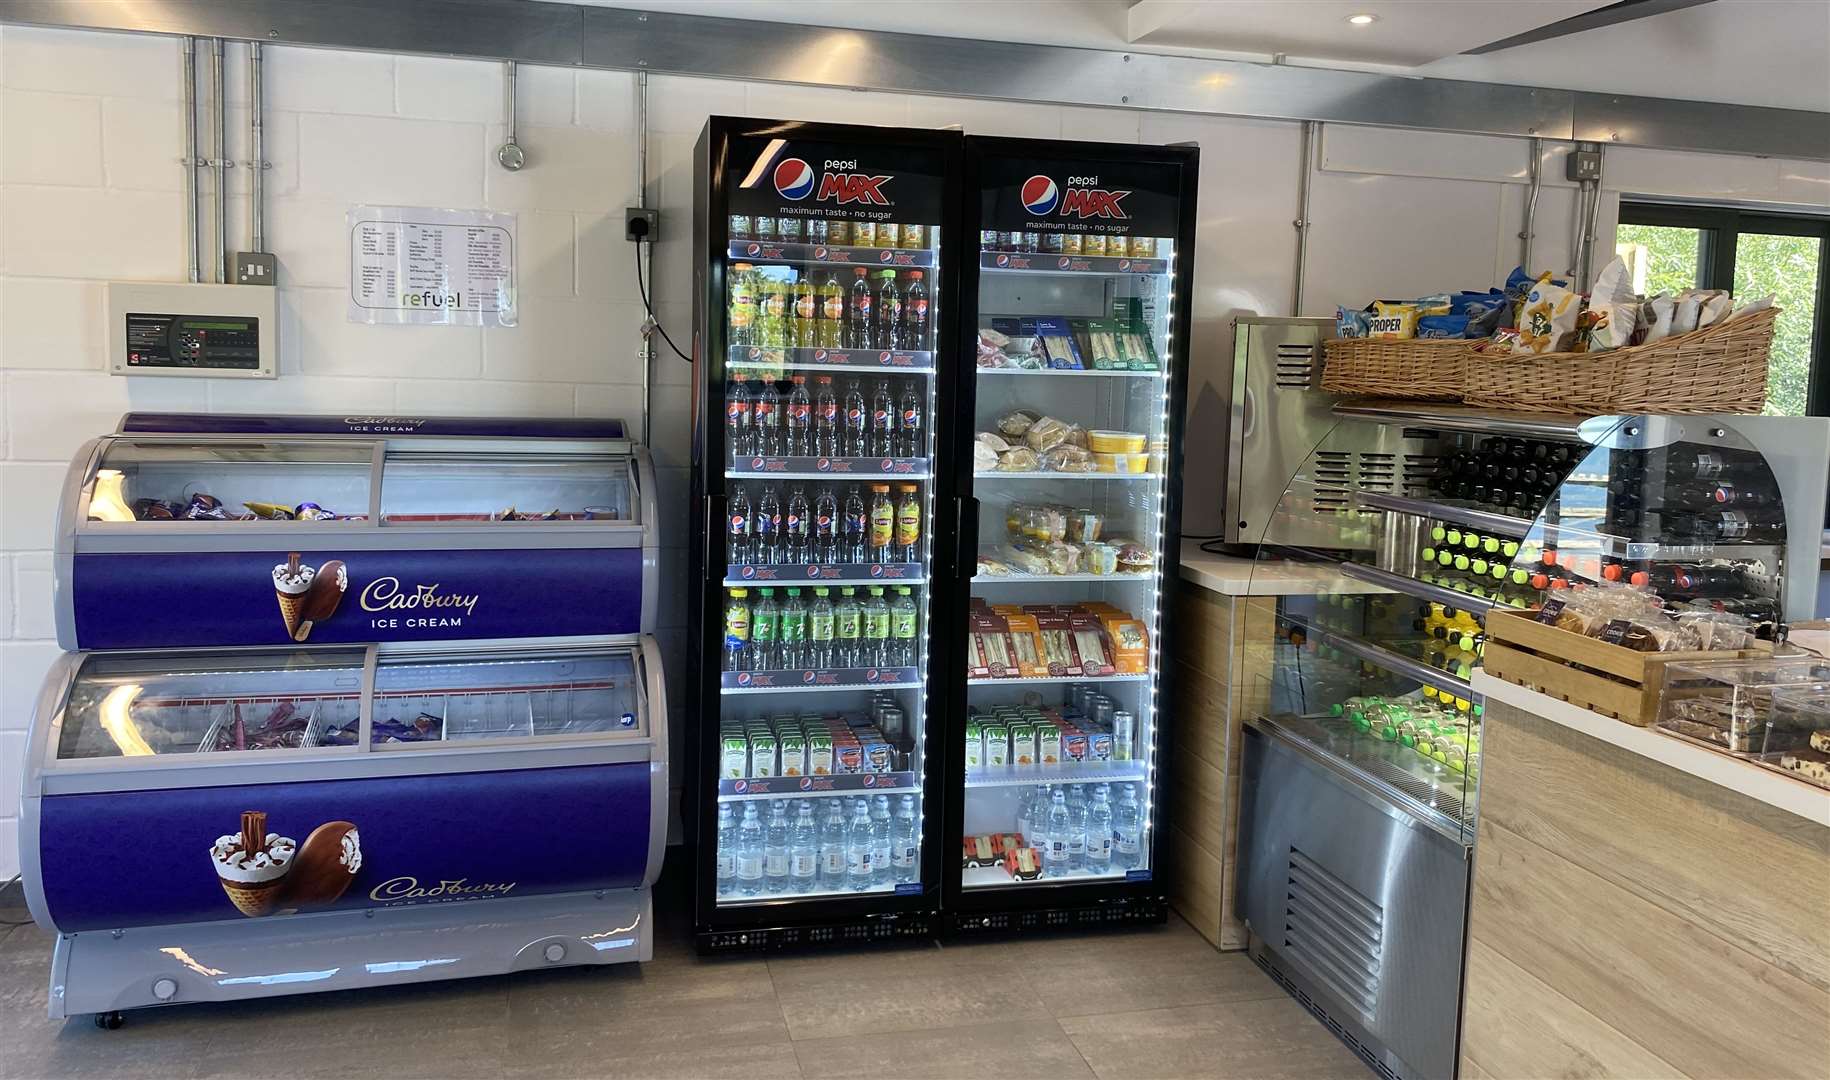 A range of sandwiches, ice creams, hot and cold drinks are available